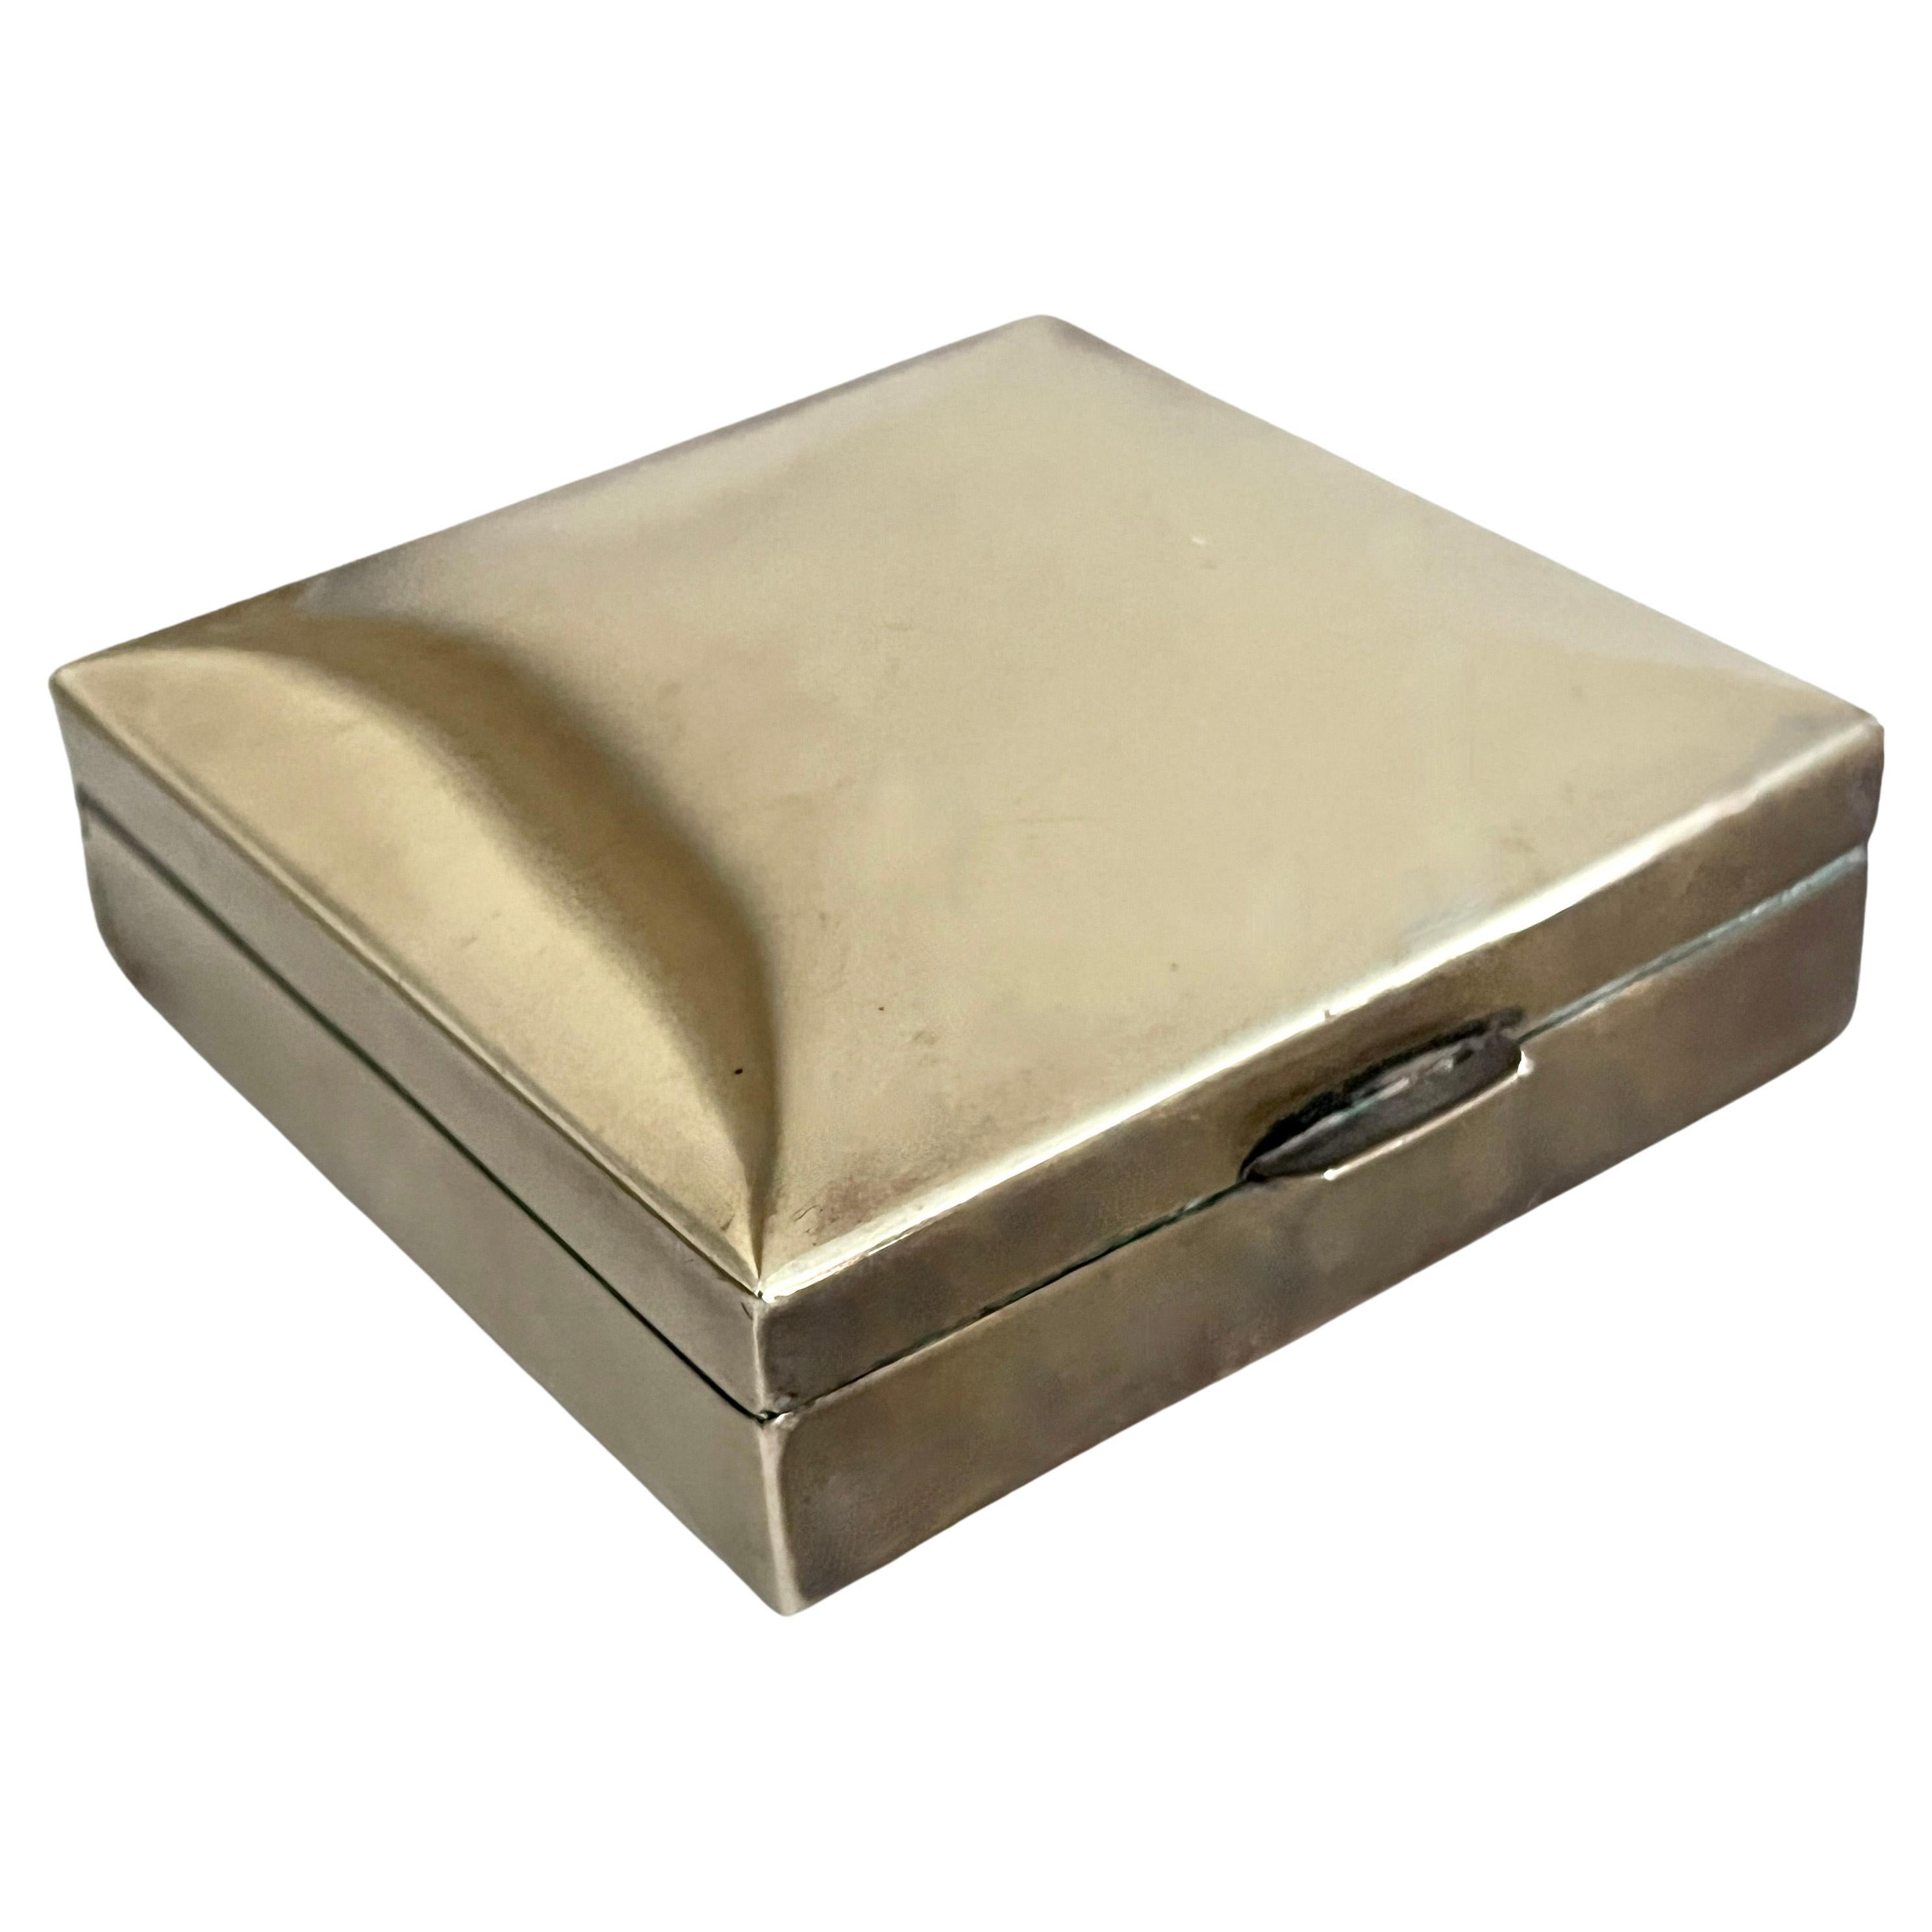 Square Polished Brass Box with Wood Lining